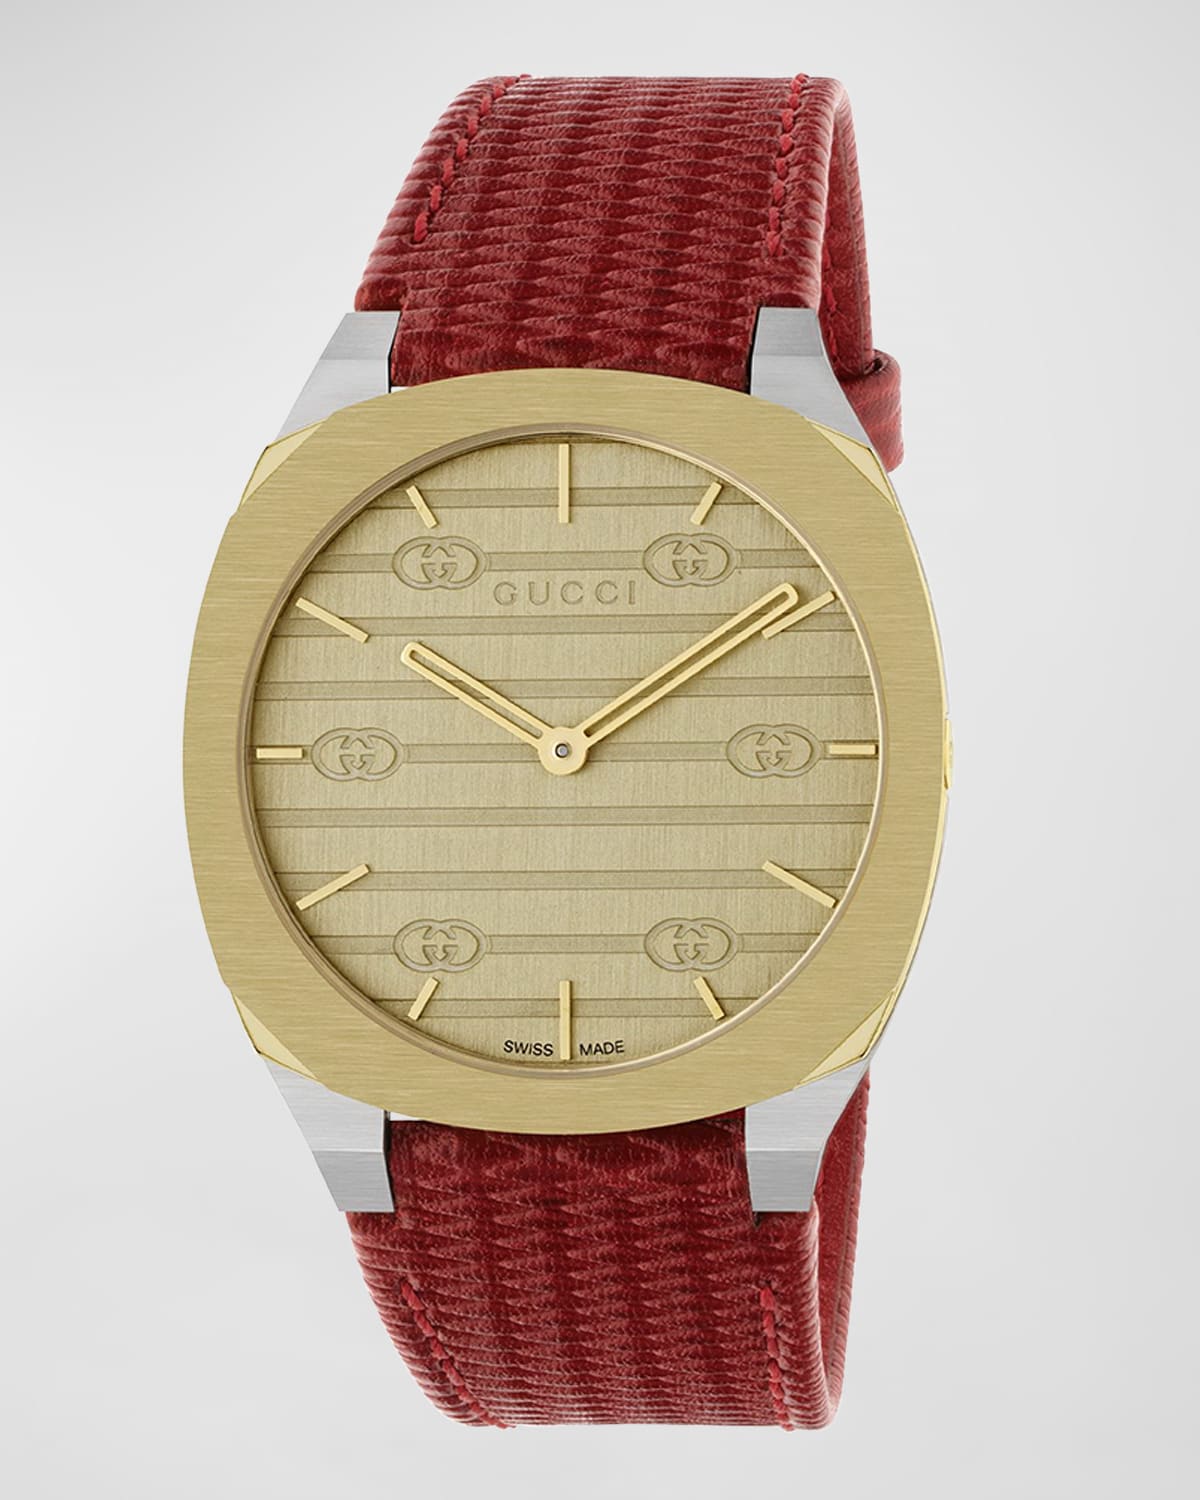 34mm 25H Quartz Watch with Leather Strap, Red